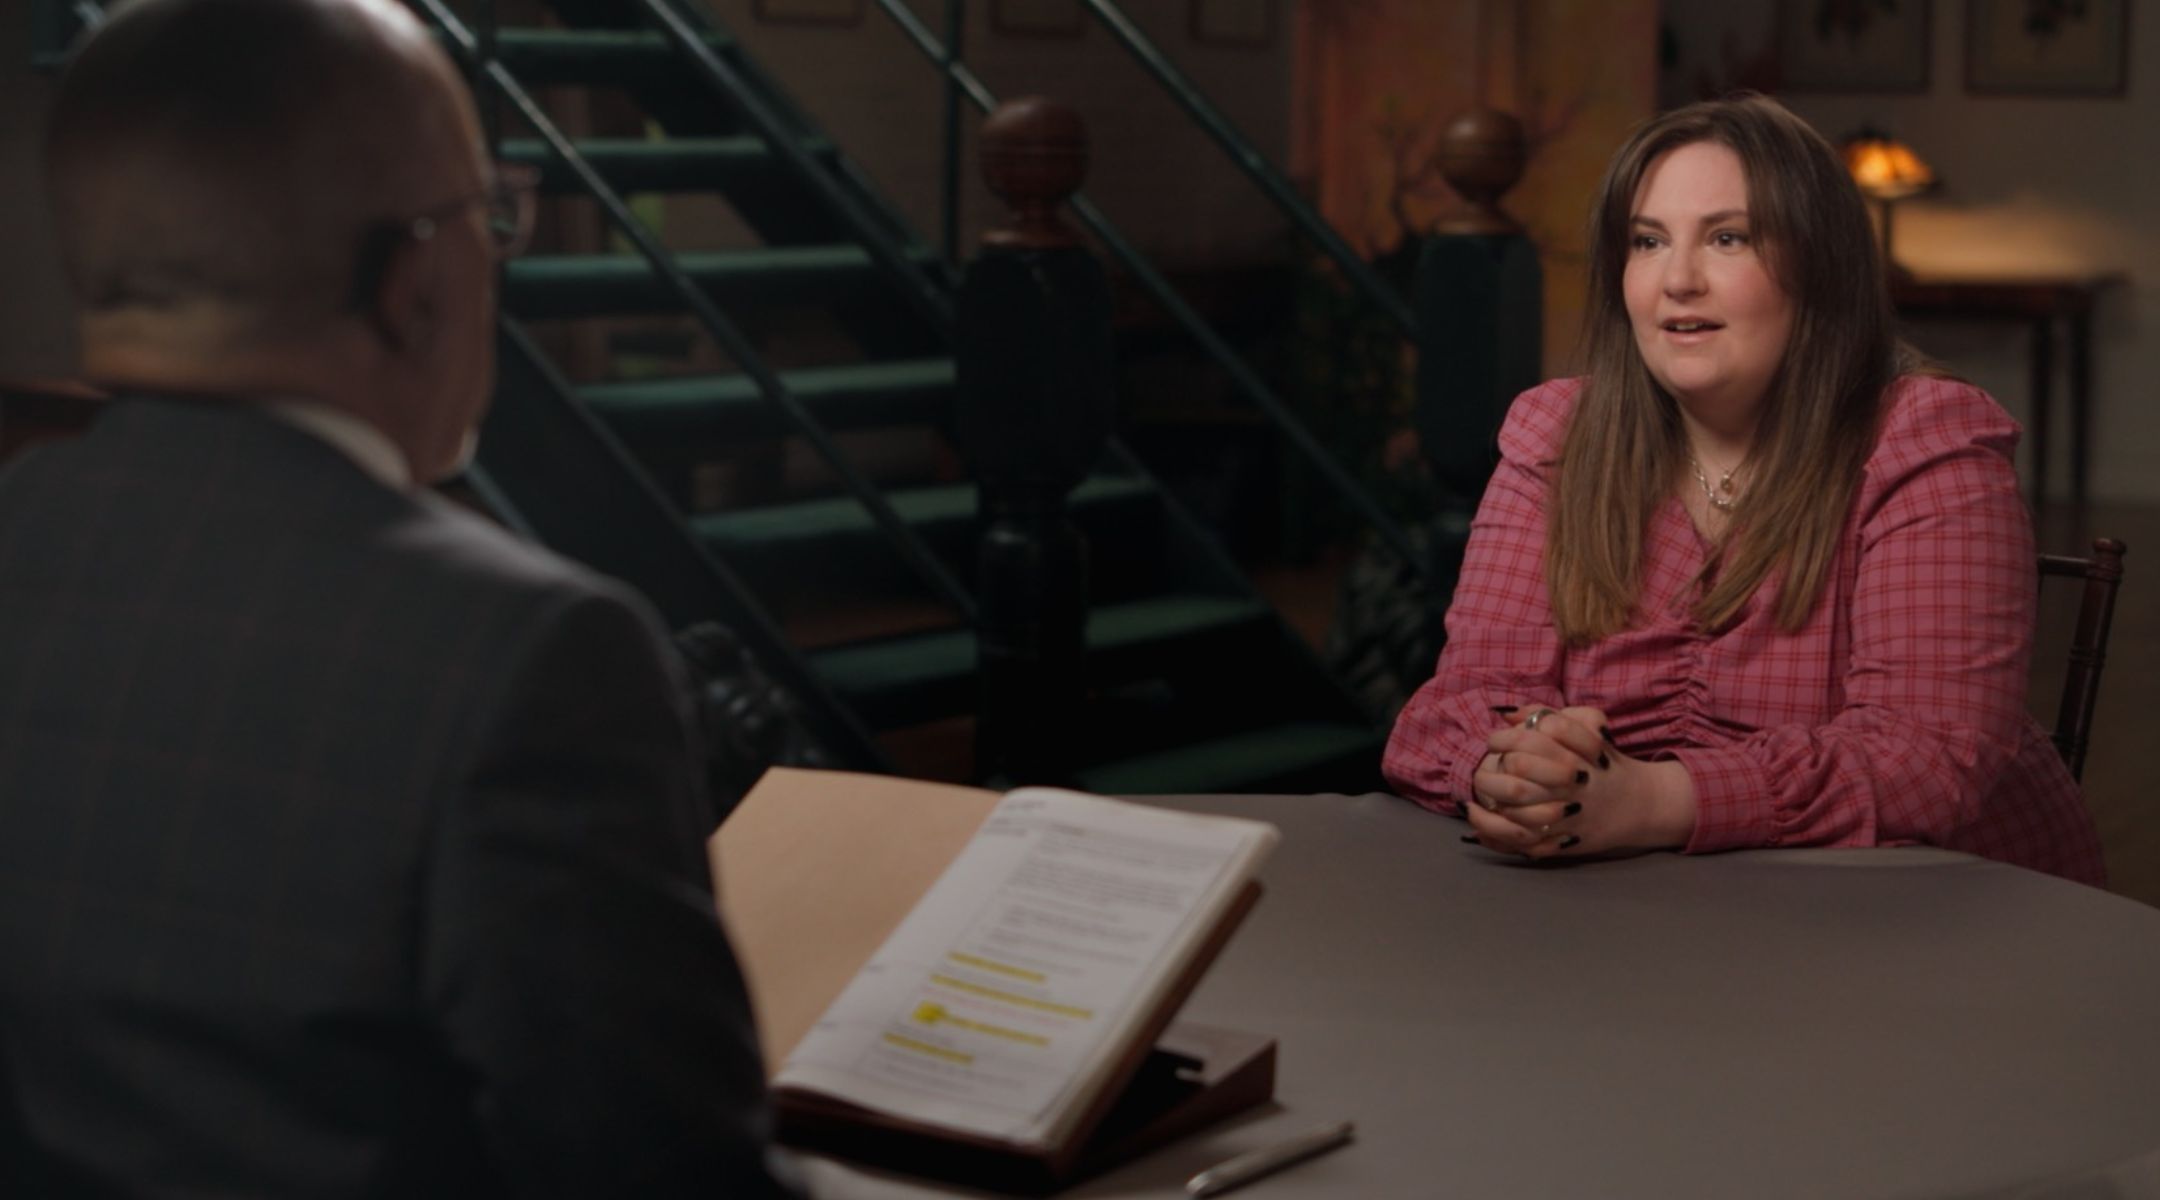 Lena Dunham appears on PBS’s genealogy series “Finding Your Roots.” (Courtesy of PBS)